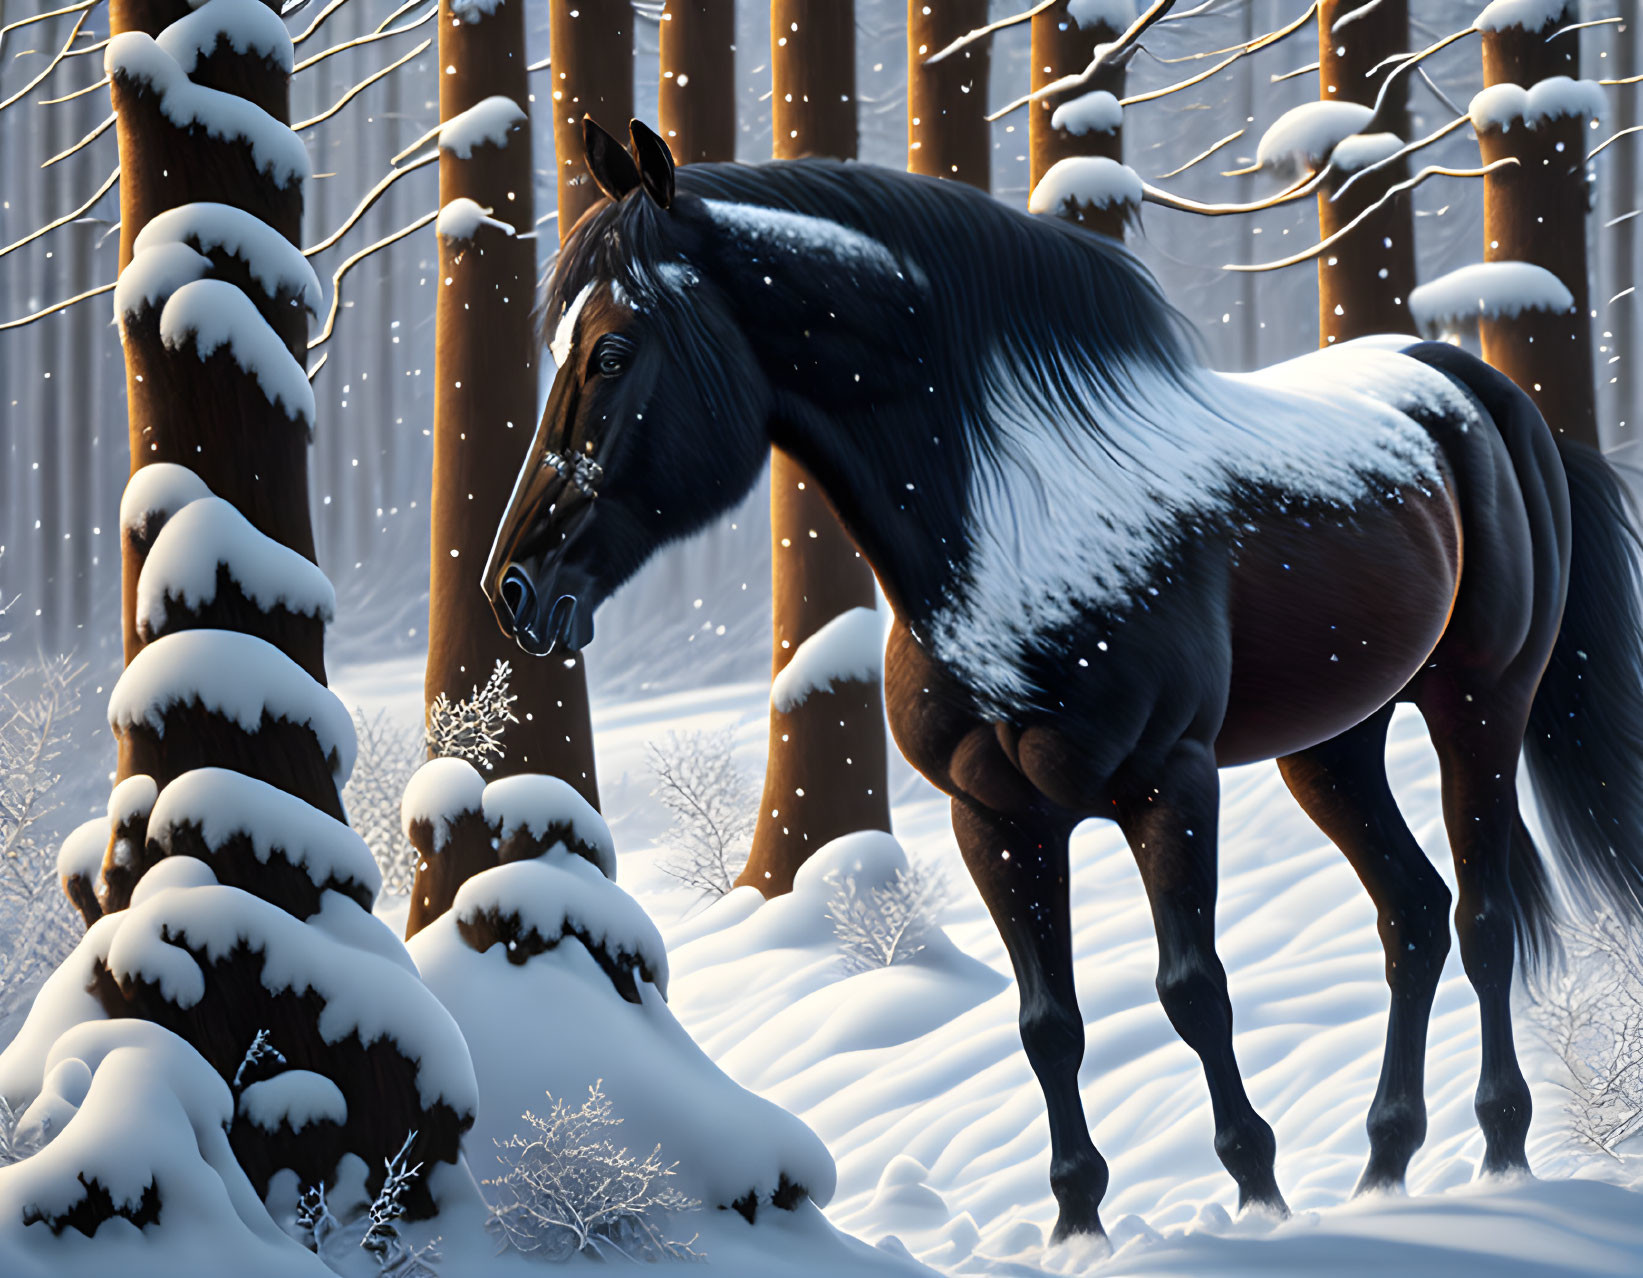 Snowy forest scene with horse in thick coat